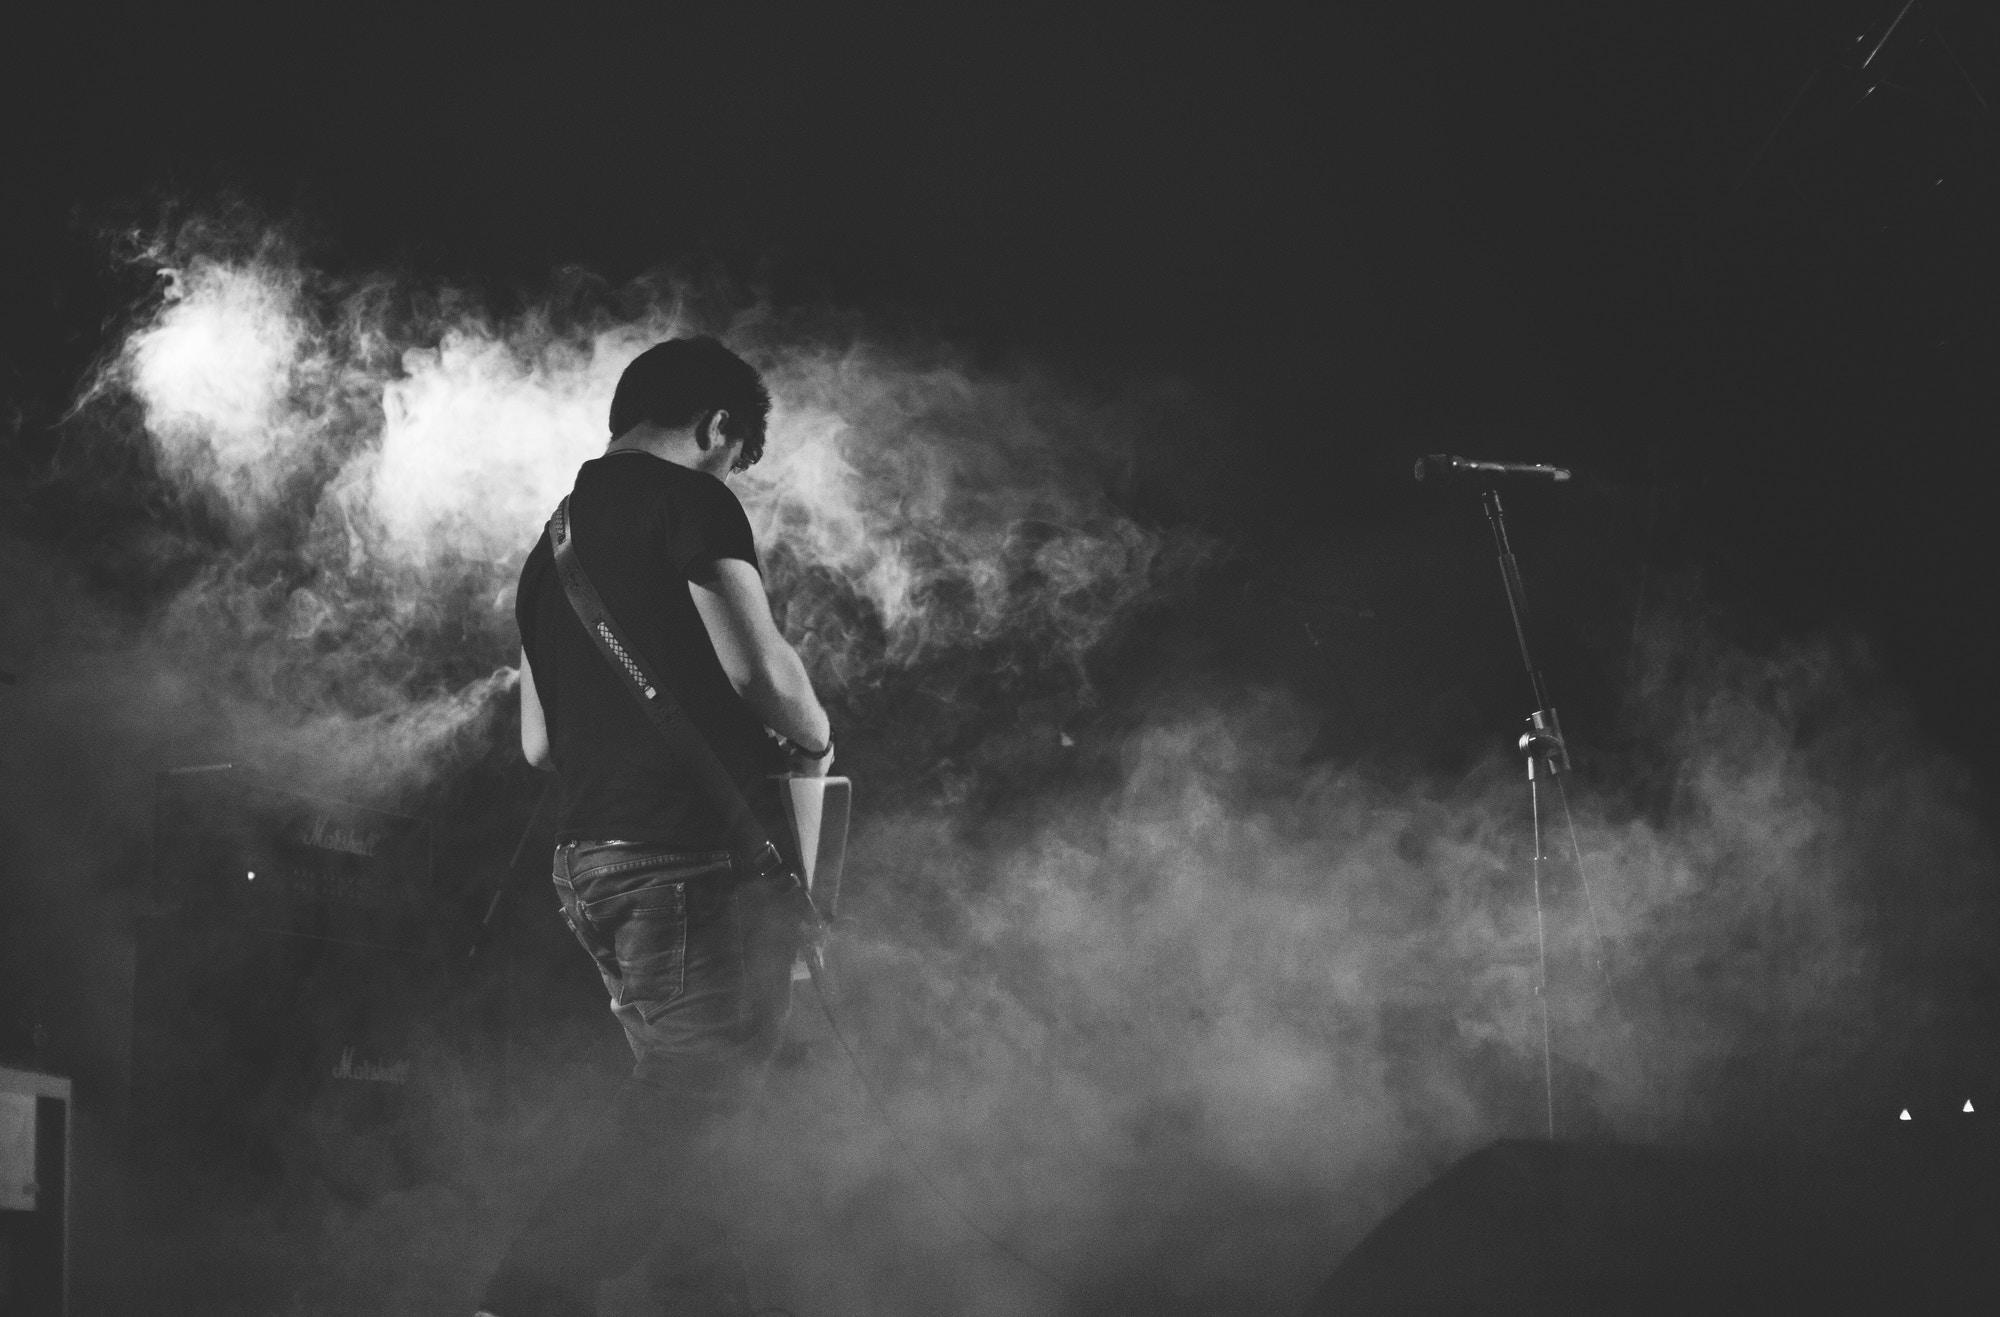 2000x1317 #musician, #black and white, #sing, #singer, #Free image, #person, #music, #music background, #outdoor, #guitarist, #music wallpaper, #play, #adult, #wallpaper, #concert, #stage, #smoke, #guitar, #performance, #male, #man HD